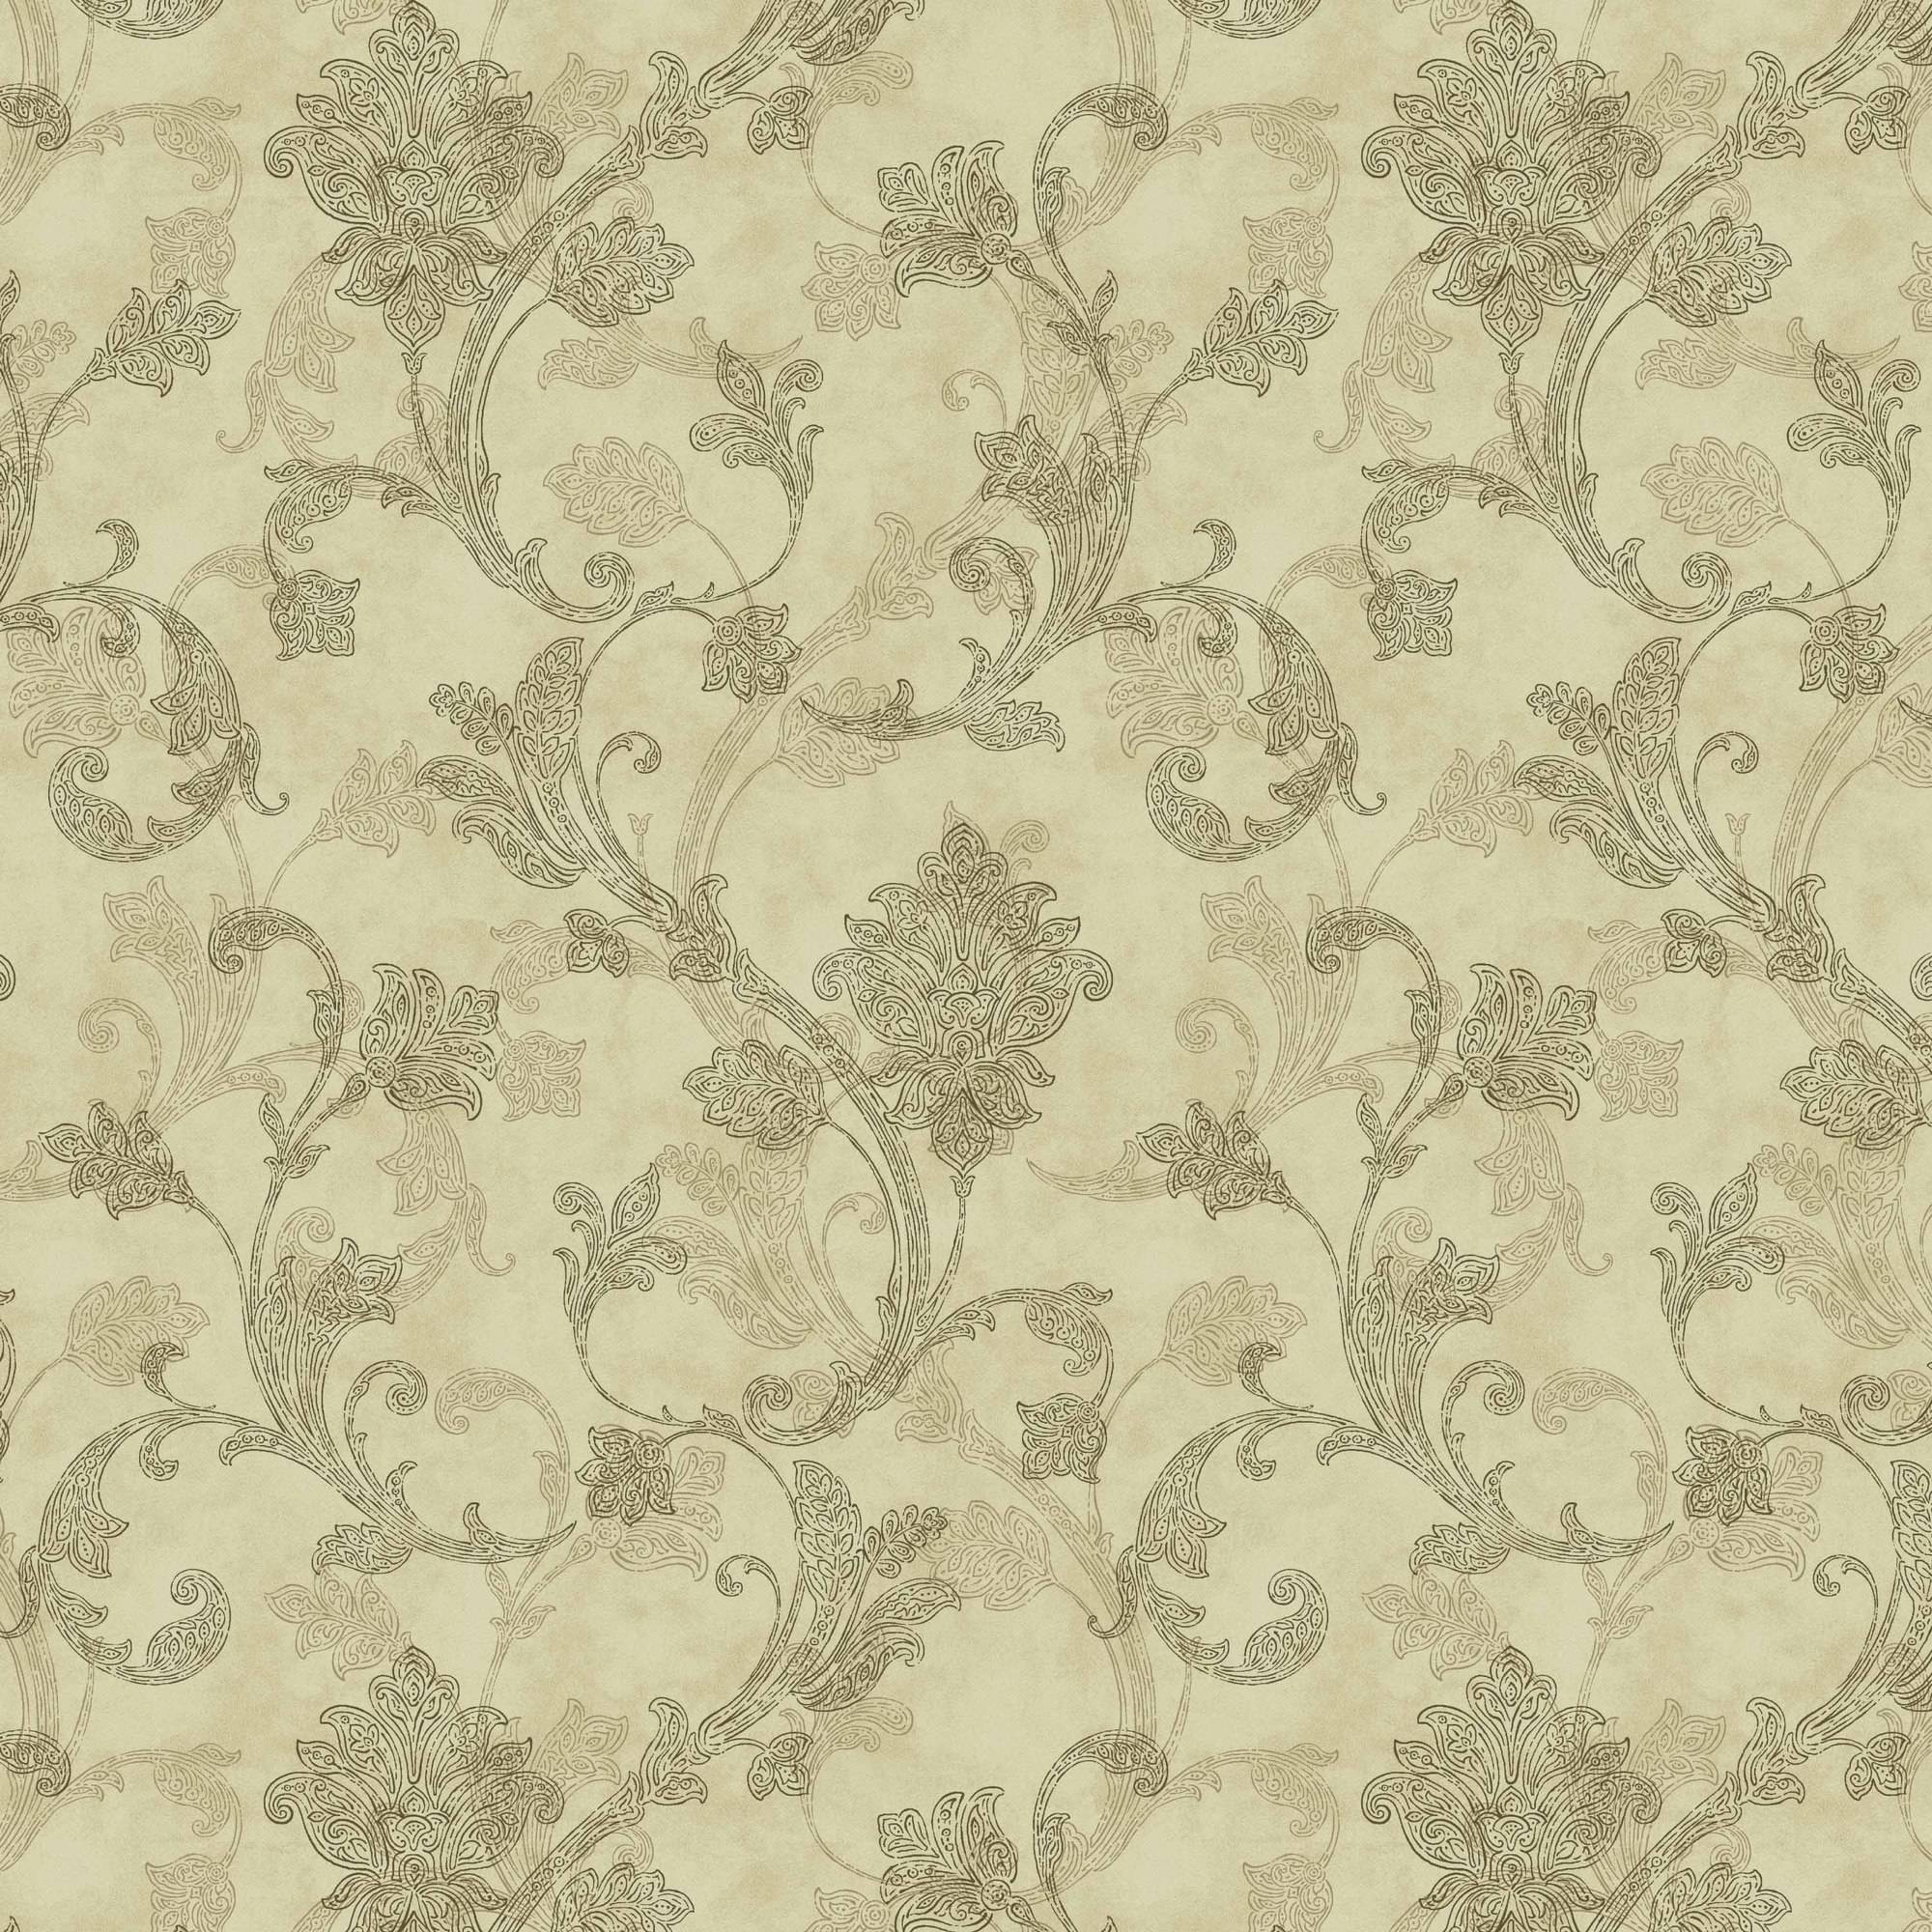 Waverly Inspirations Cotton Duck 54" Jaco Fres Brown Fabric, per Yard